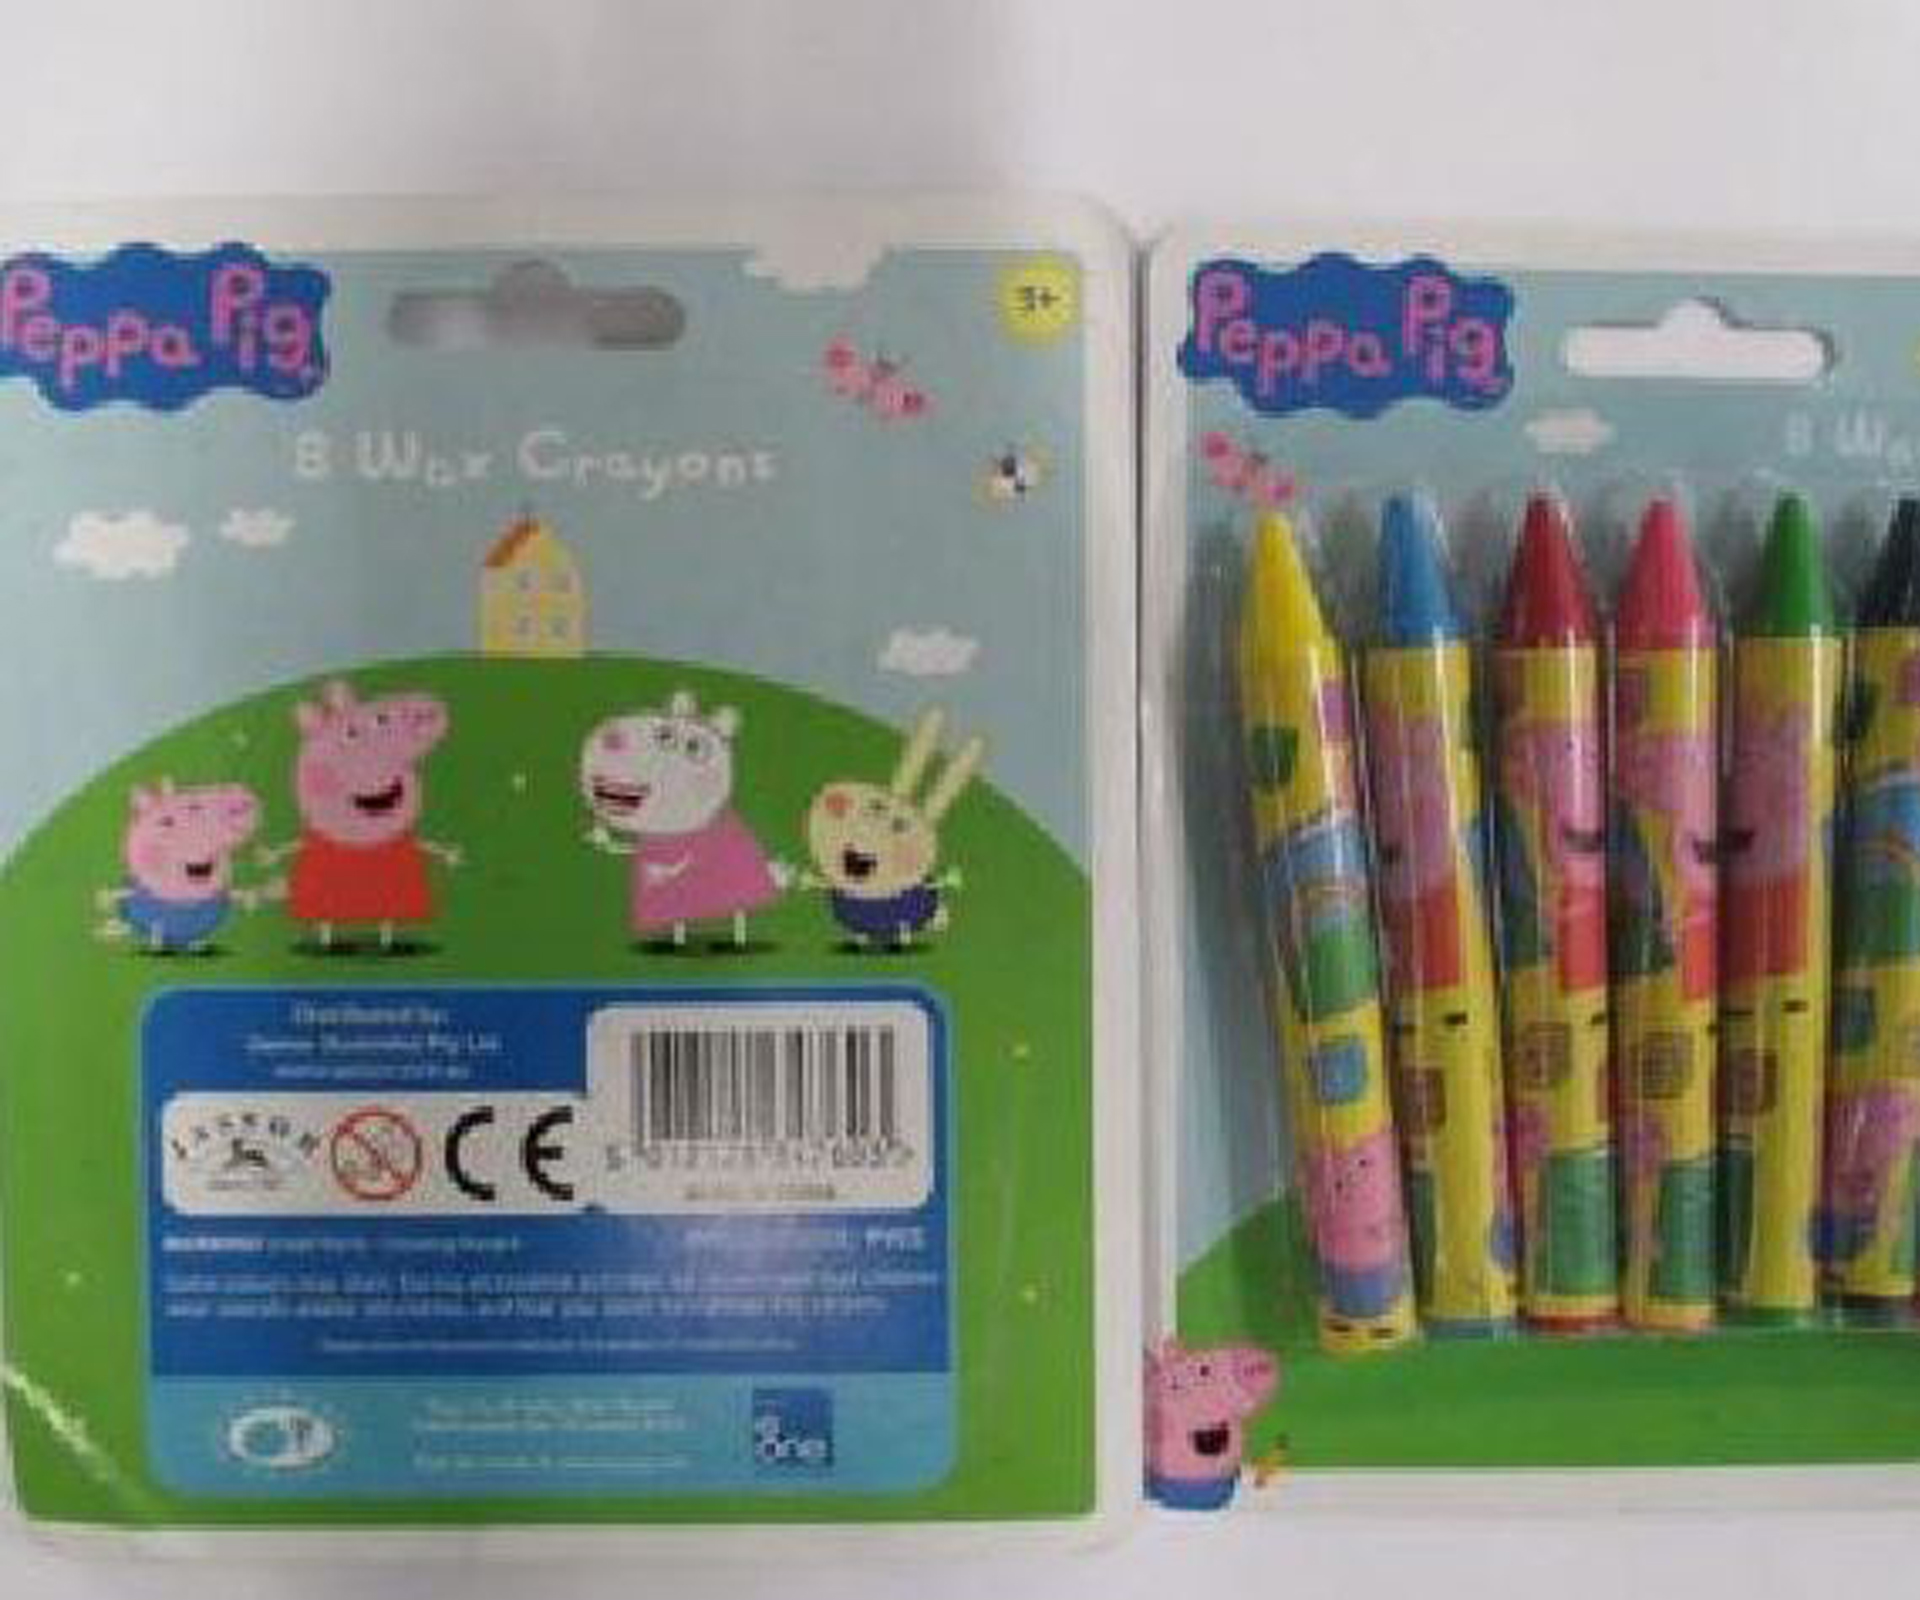 Childcare warns parents as asbestos is found in Peppa Pig crayons